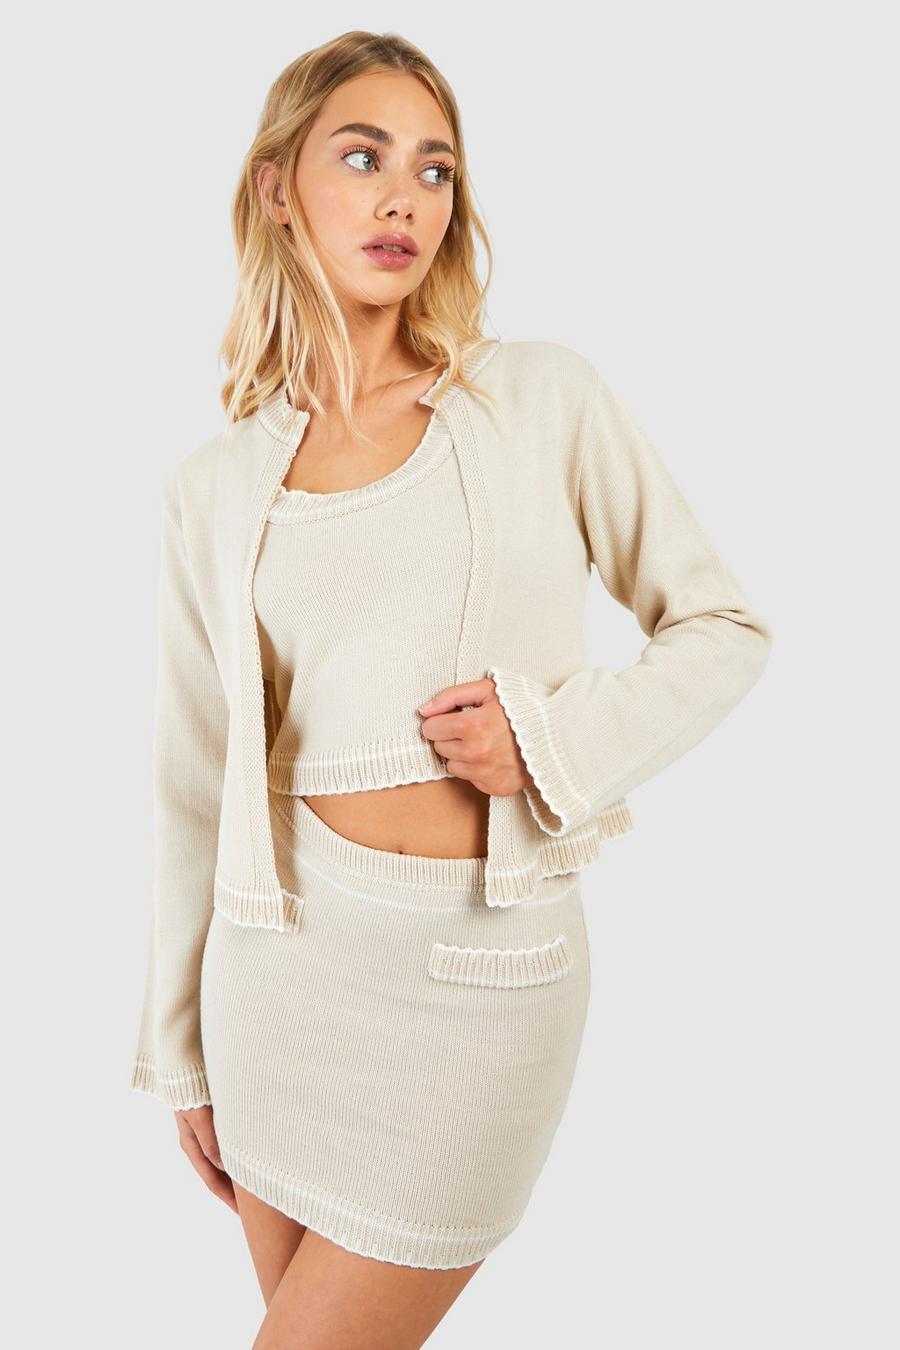 Stone Contrast Stitch 3 Piece Knitted Cardigan, Crop Top And Mini Skirt Set image number 1